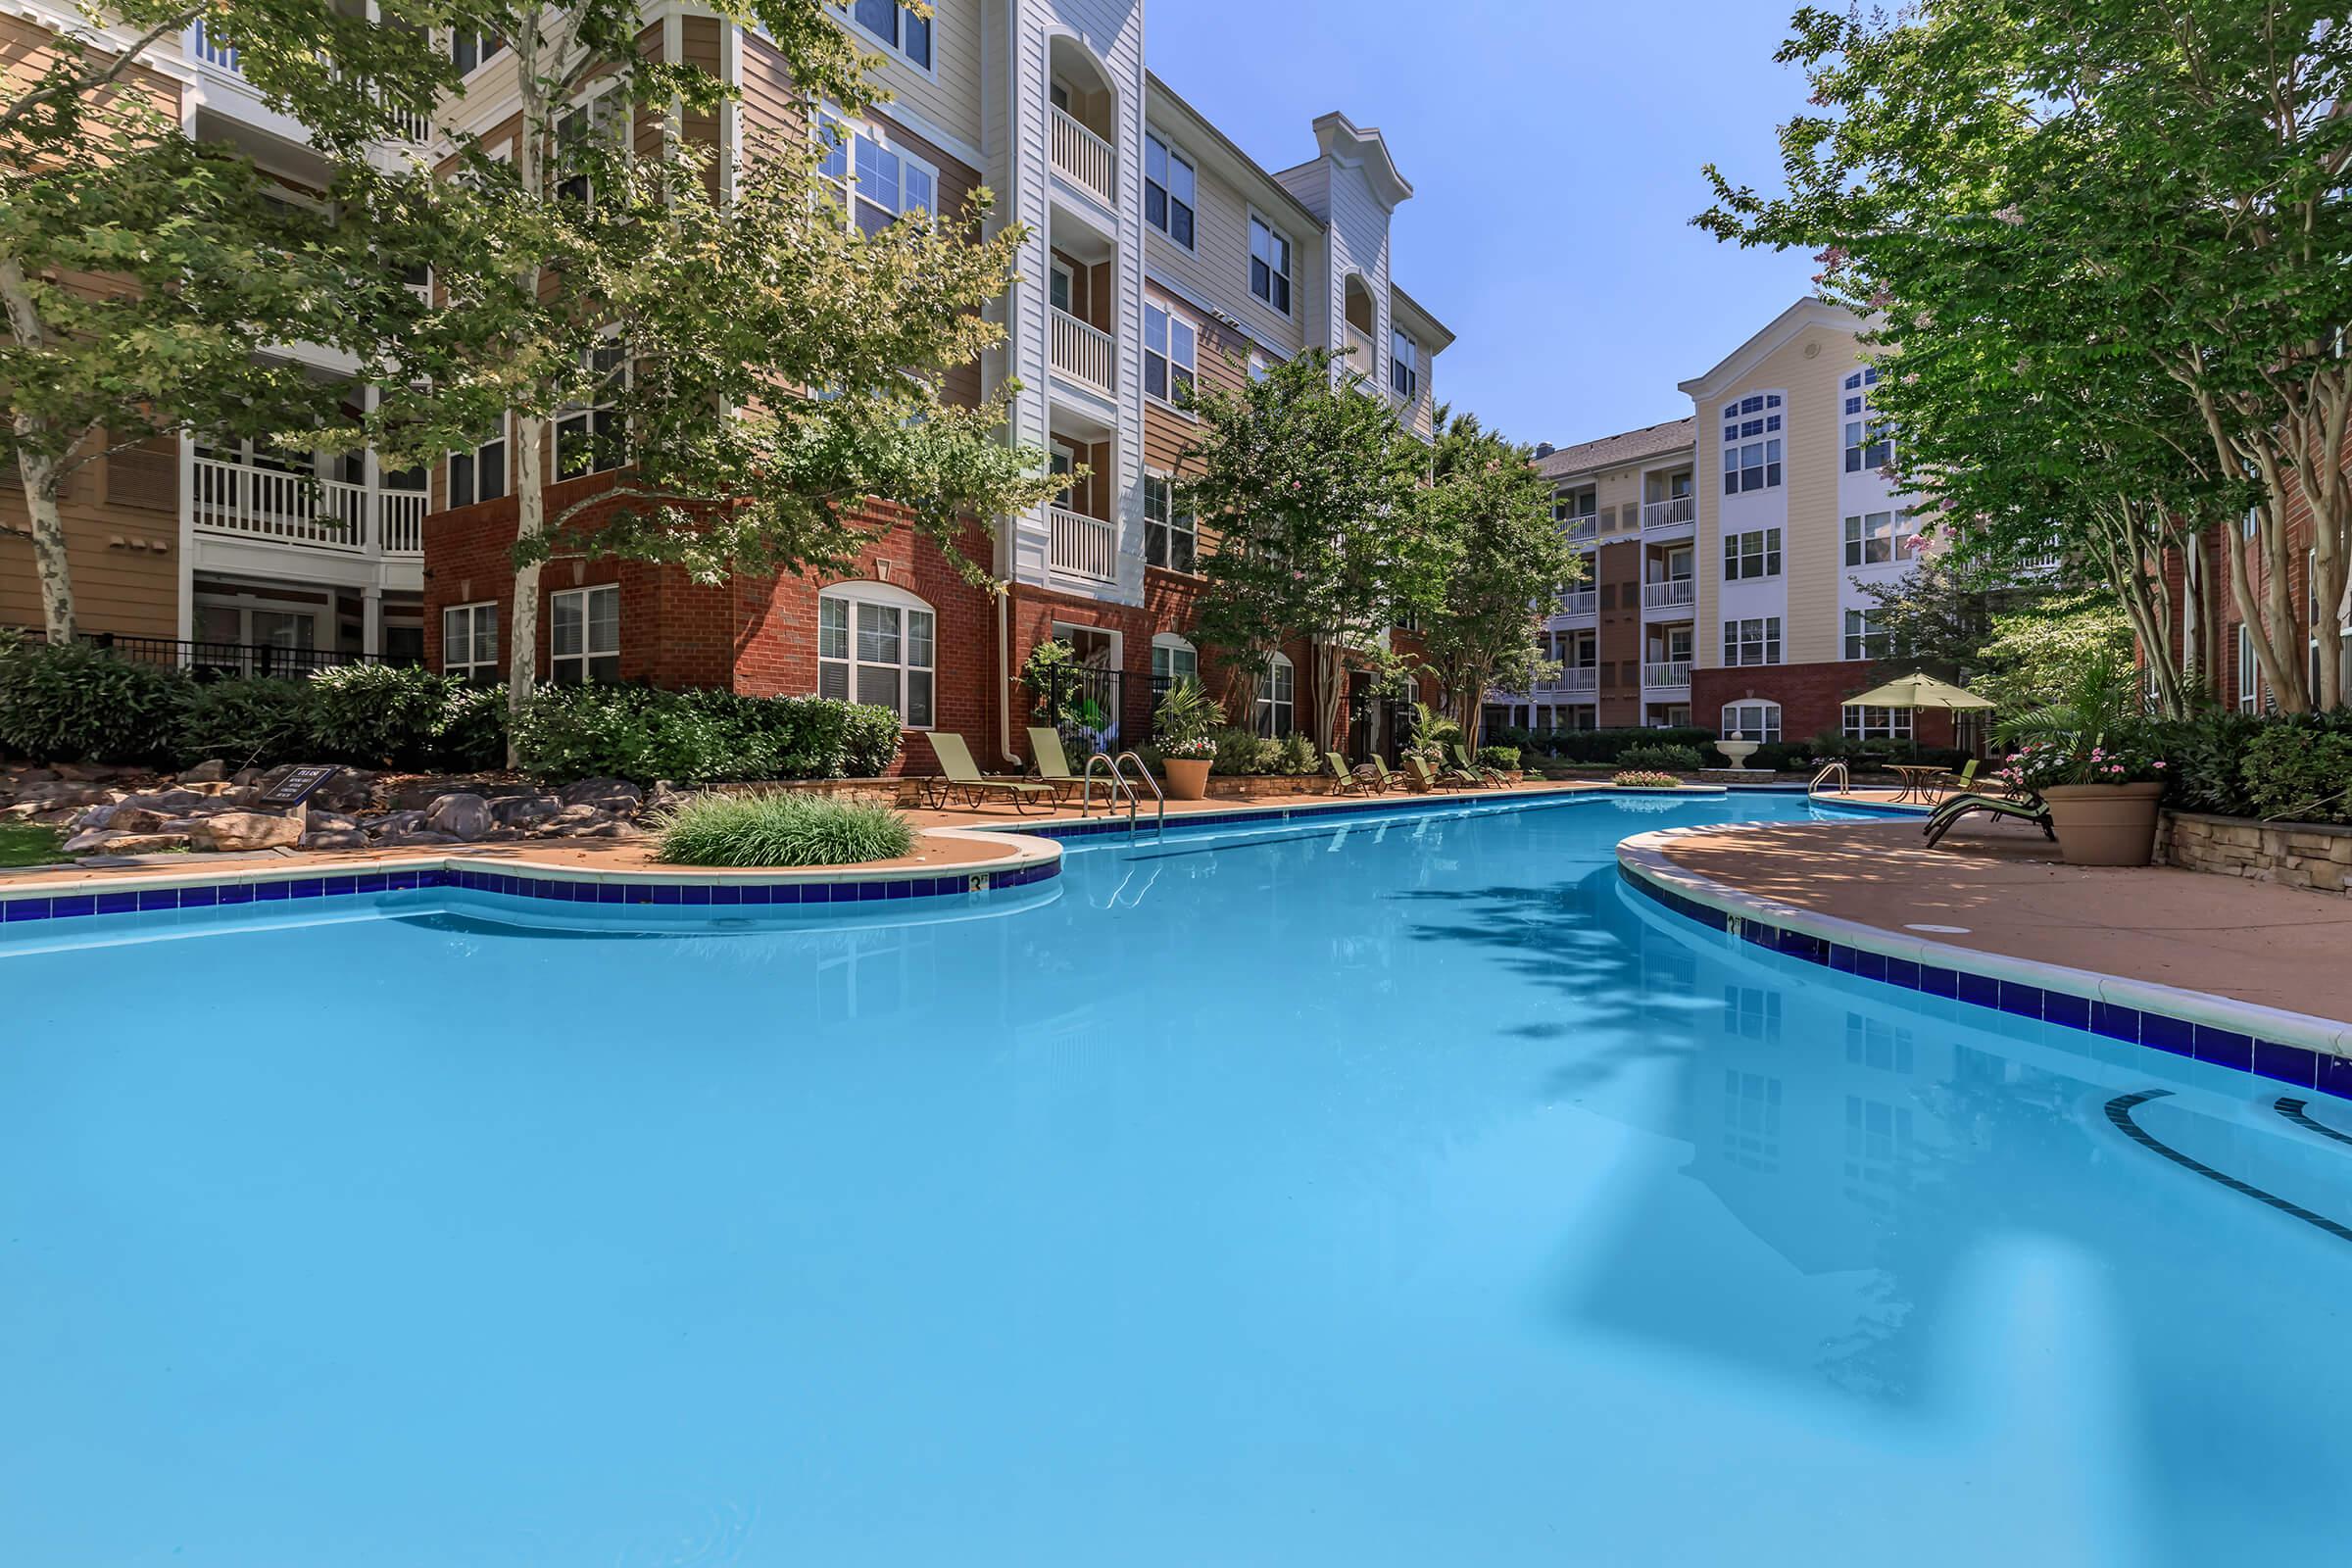 Creatice Apartments In Laurel Md Pg County for Large Space